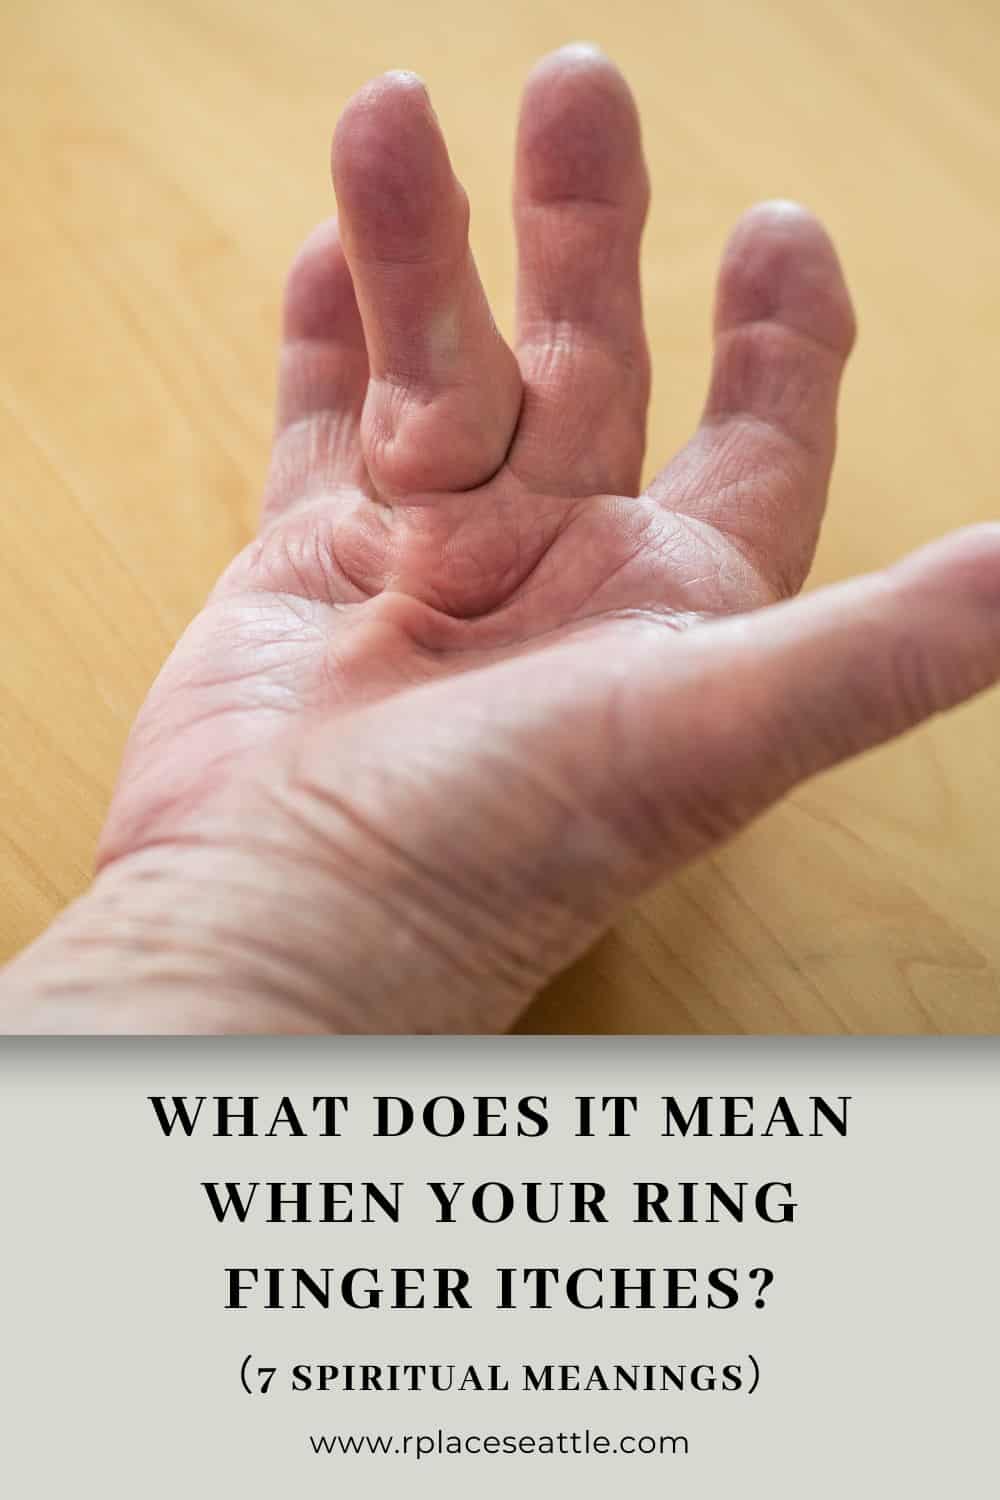 7 Spiritual meanings of your ring finger itching